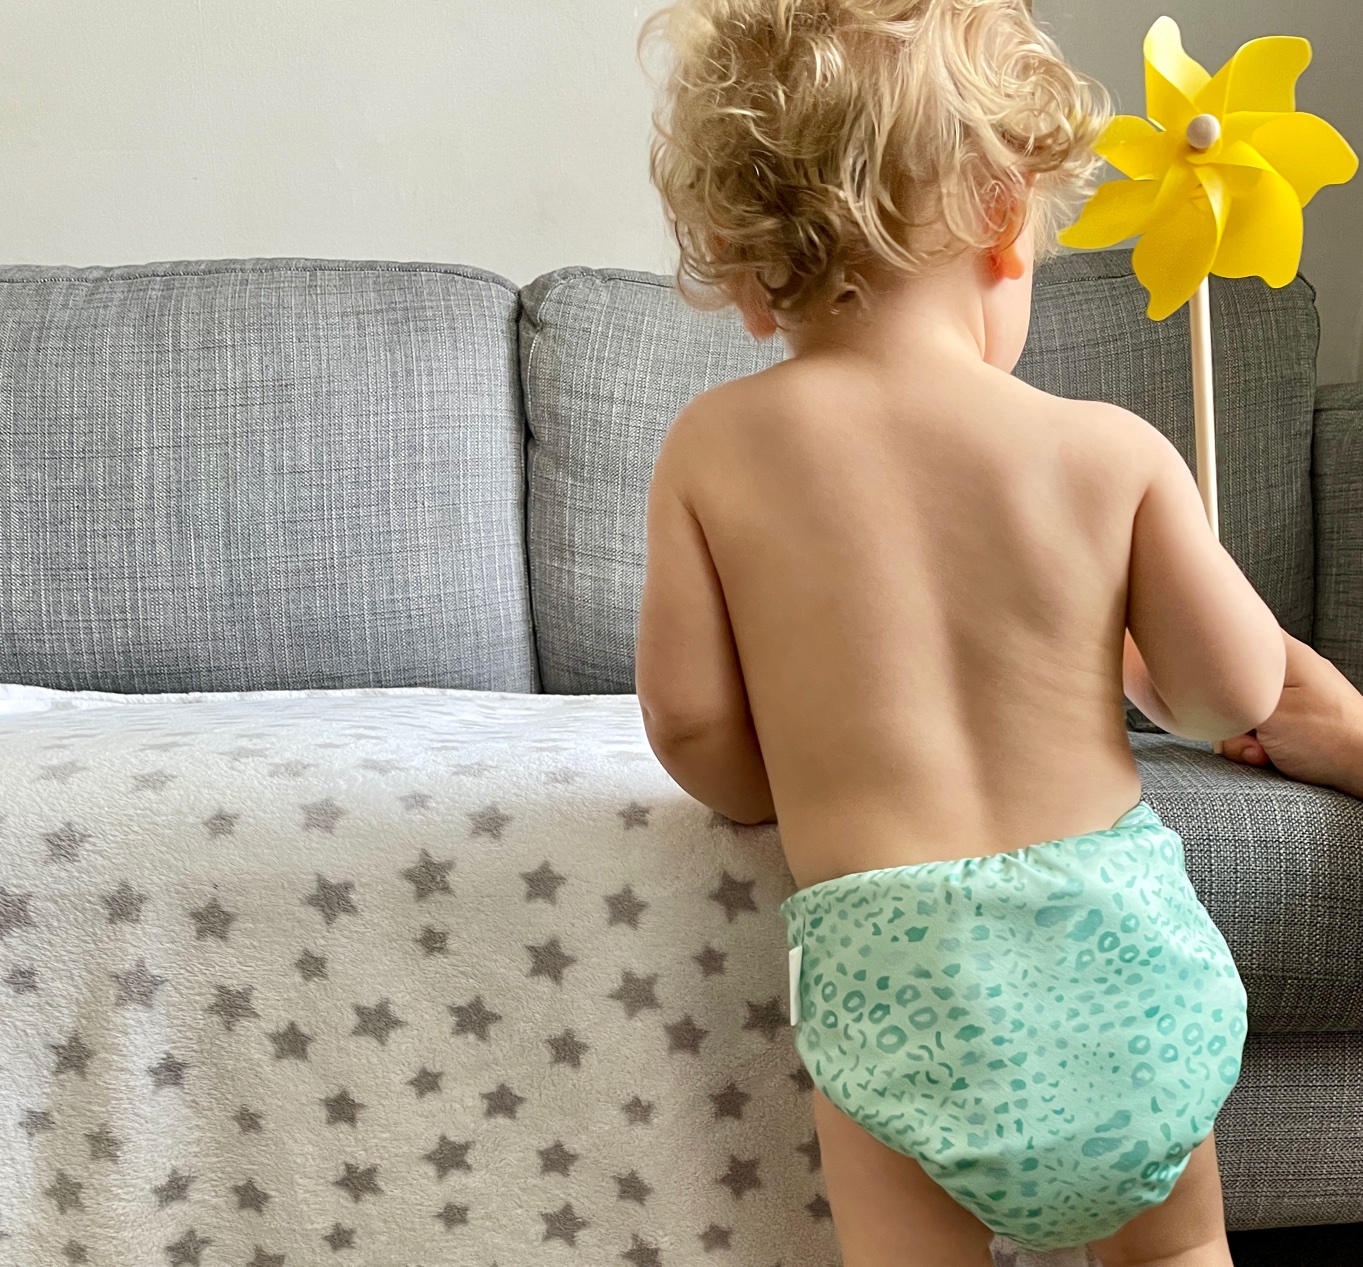 Reusable nappies for babies - from Modi Bodi